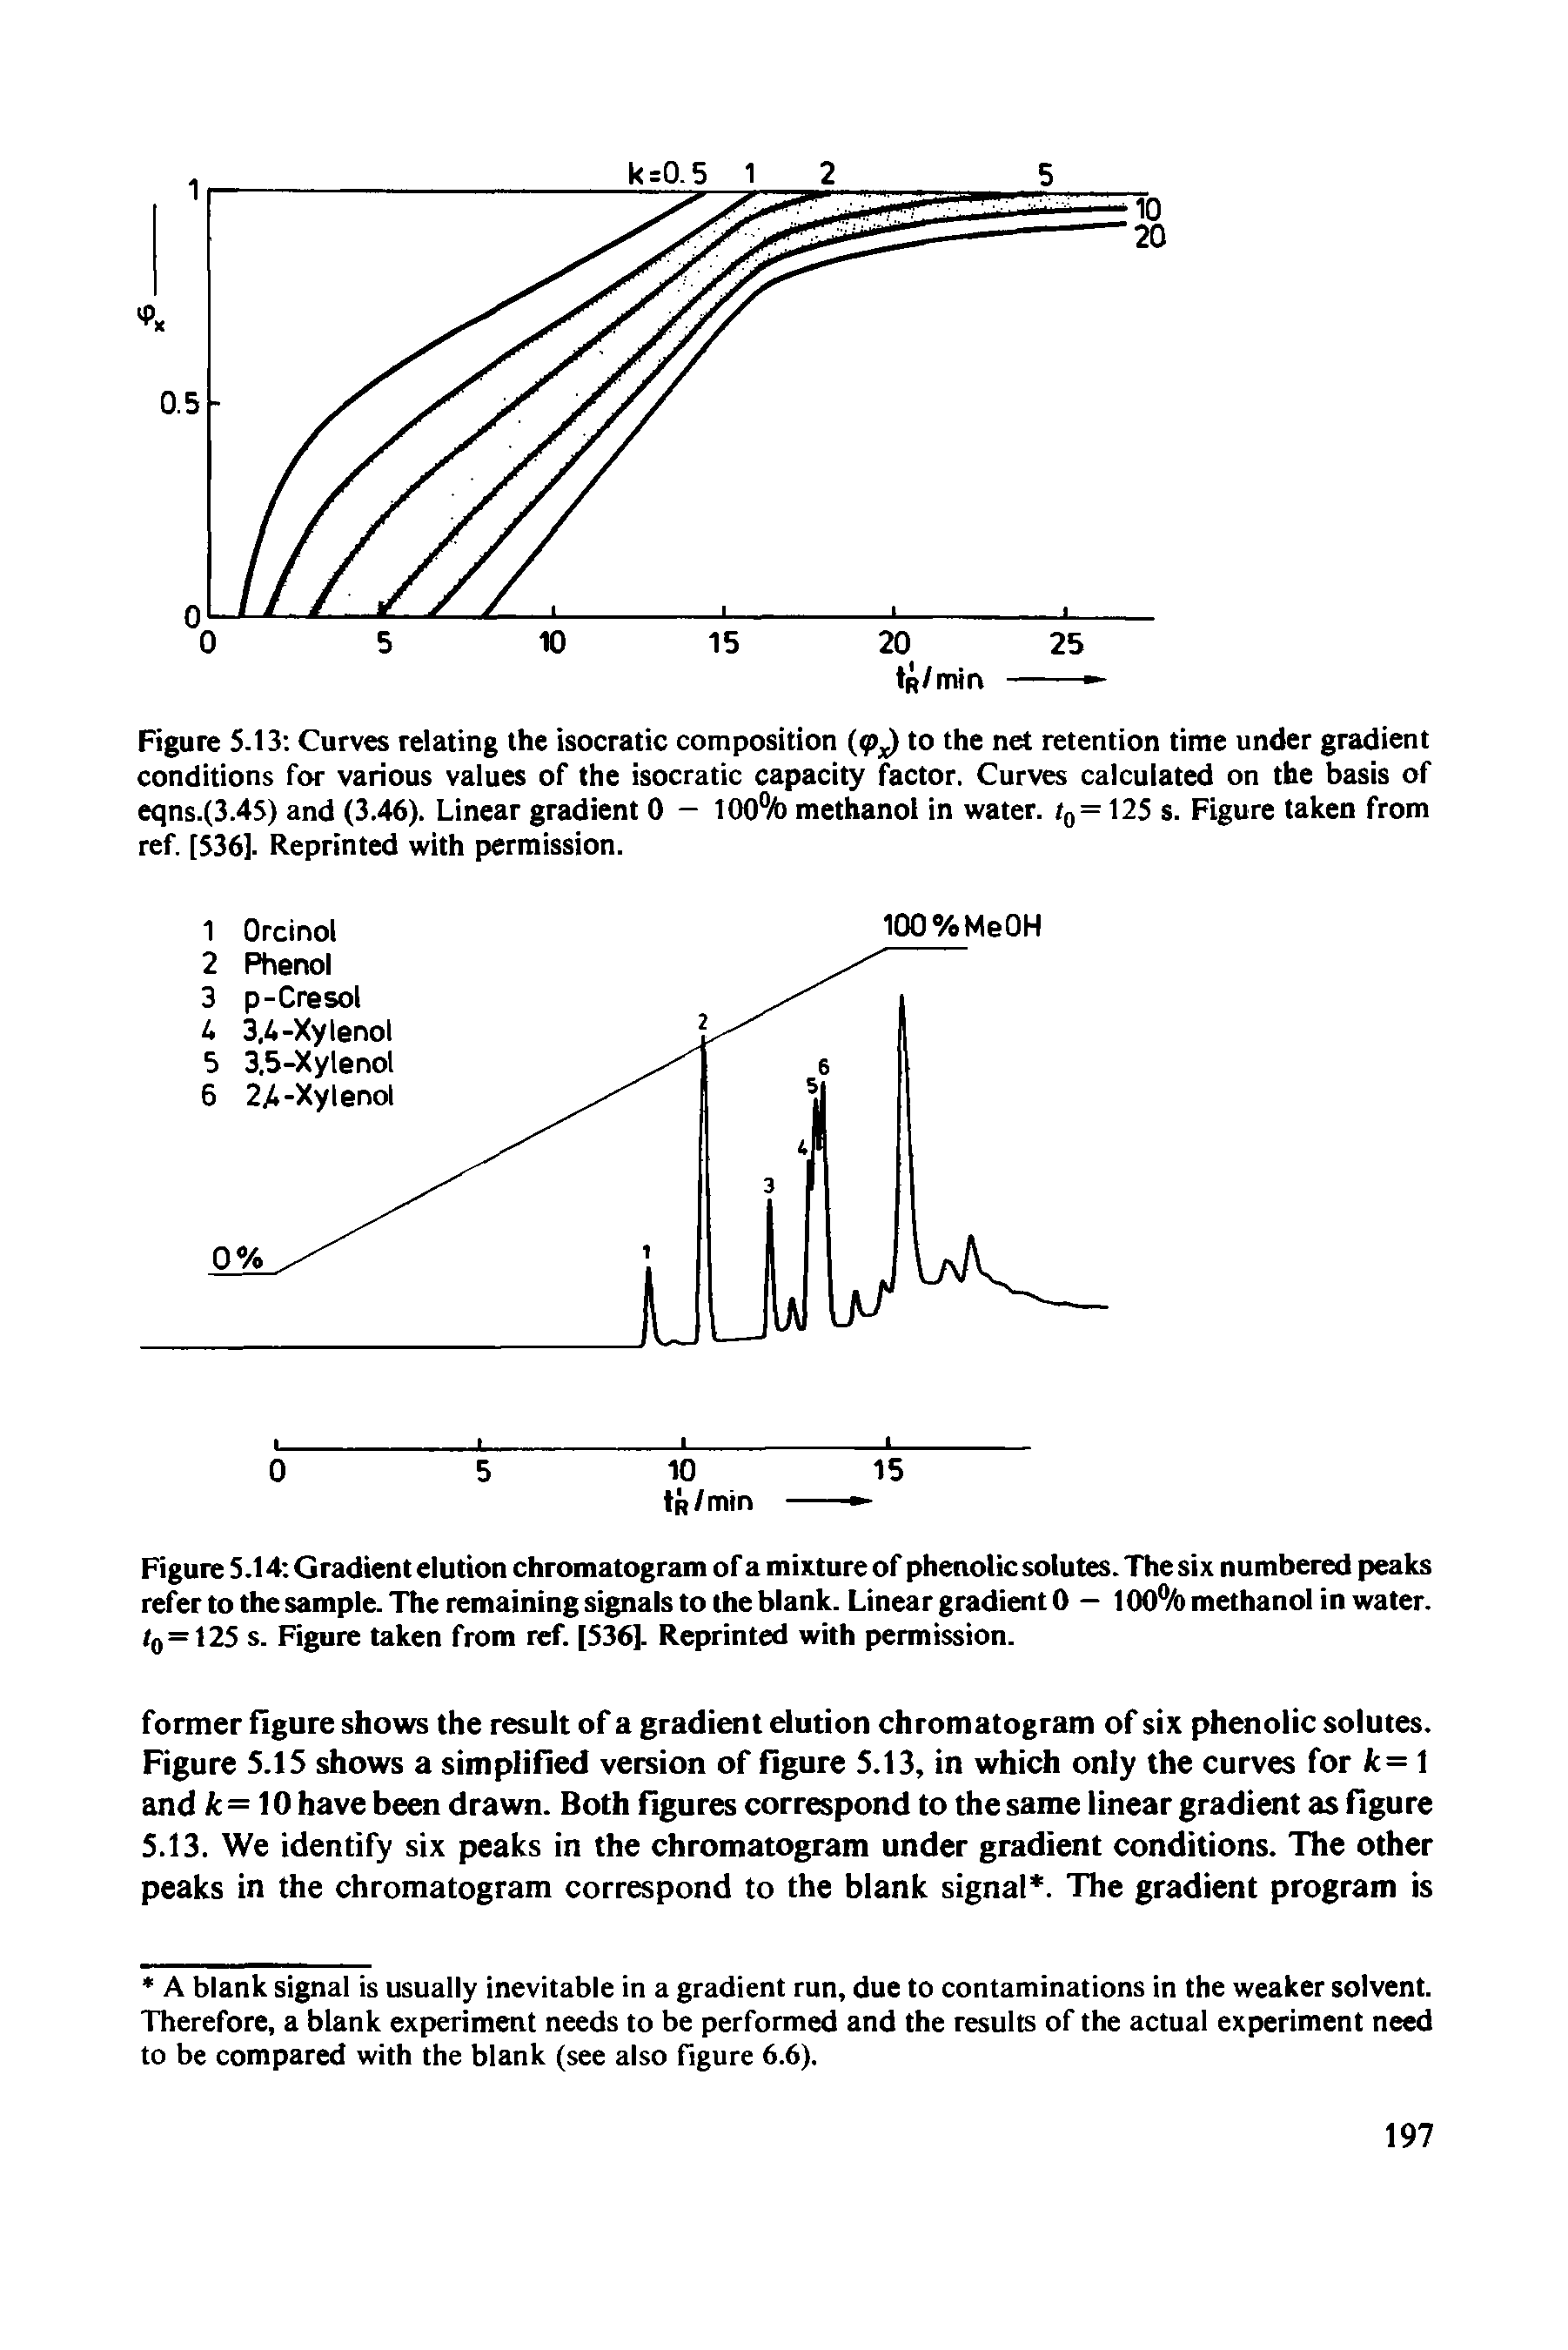 Figure 5.14 Gradient elution chromatogram of a mixture of phenolic solutes. The six numbered peaks refer to the sample. The remaining signals to the blank. Linear gradient 0 — 100% methanol in water. /0=125 s. Figure taken from ref. [536]. Reprinted with permission.